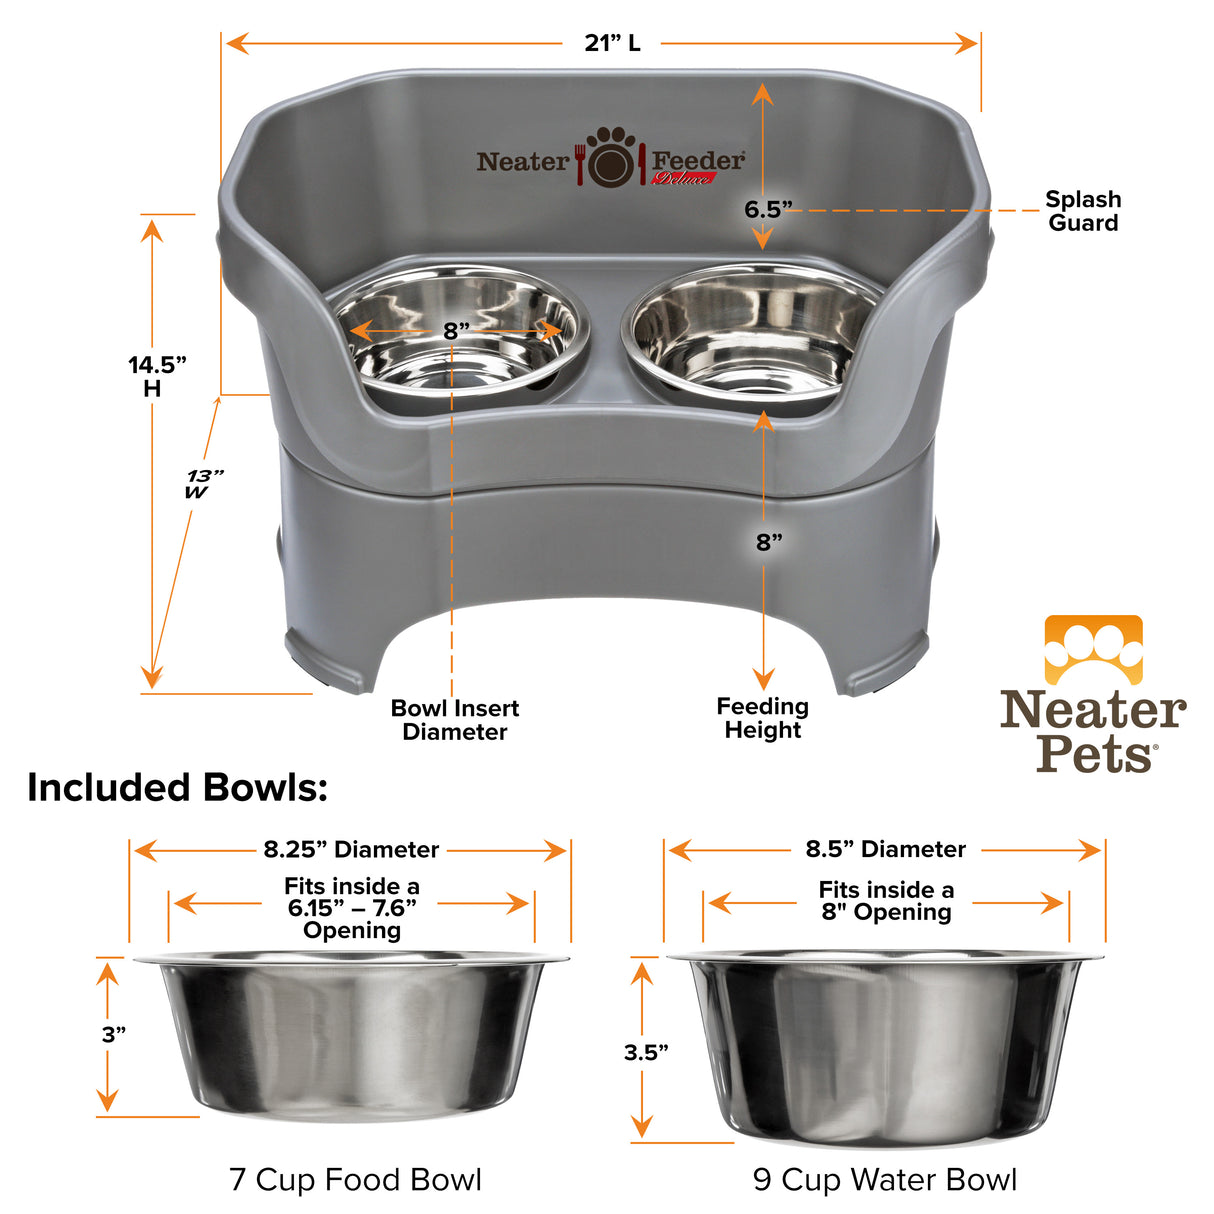 Deluxe Gunmetal Grey Large Dog Neater Feeder and Bowl dimensions